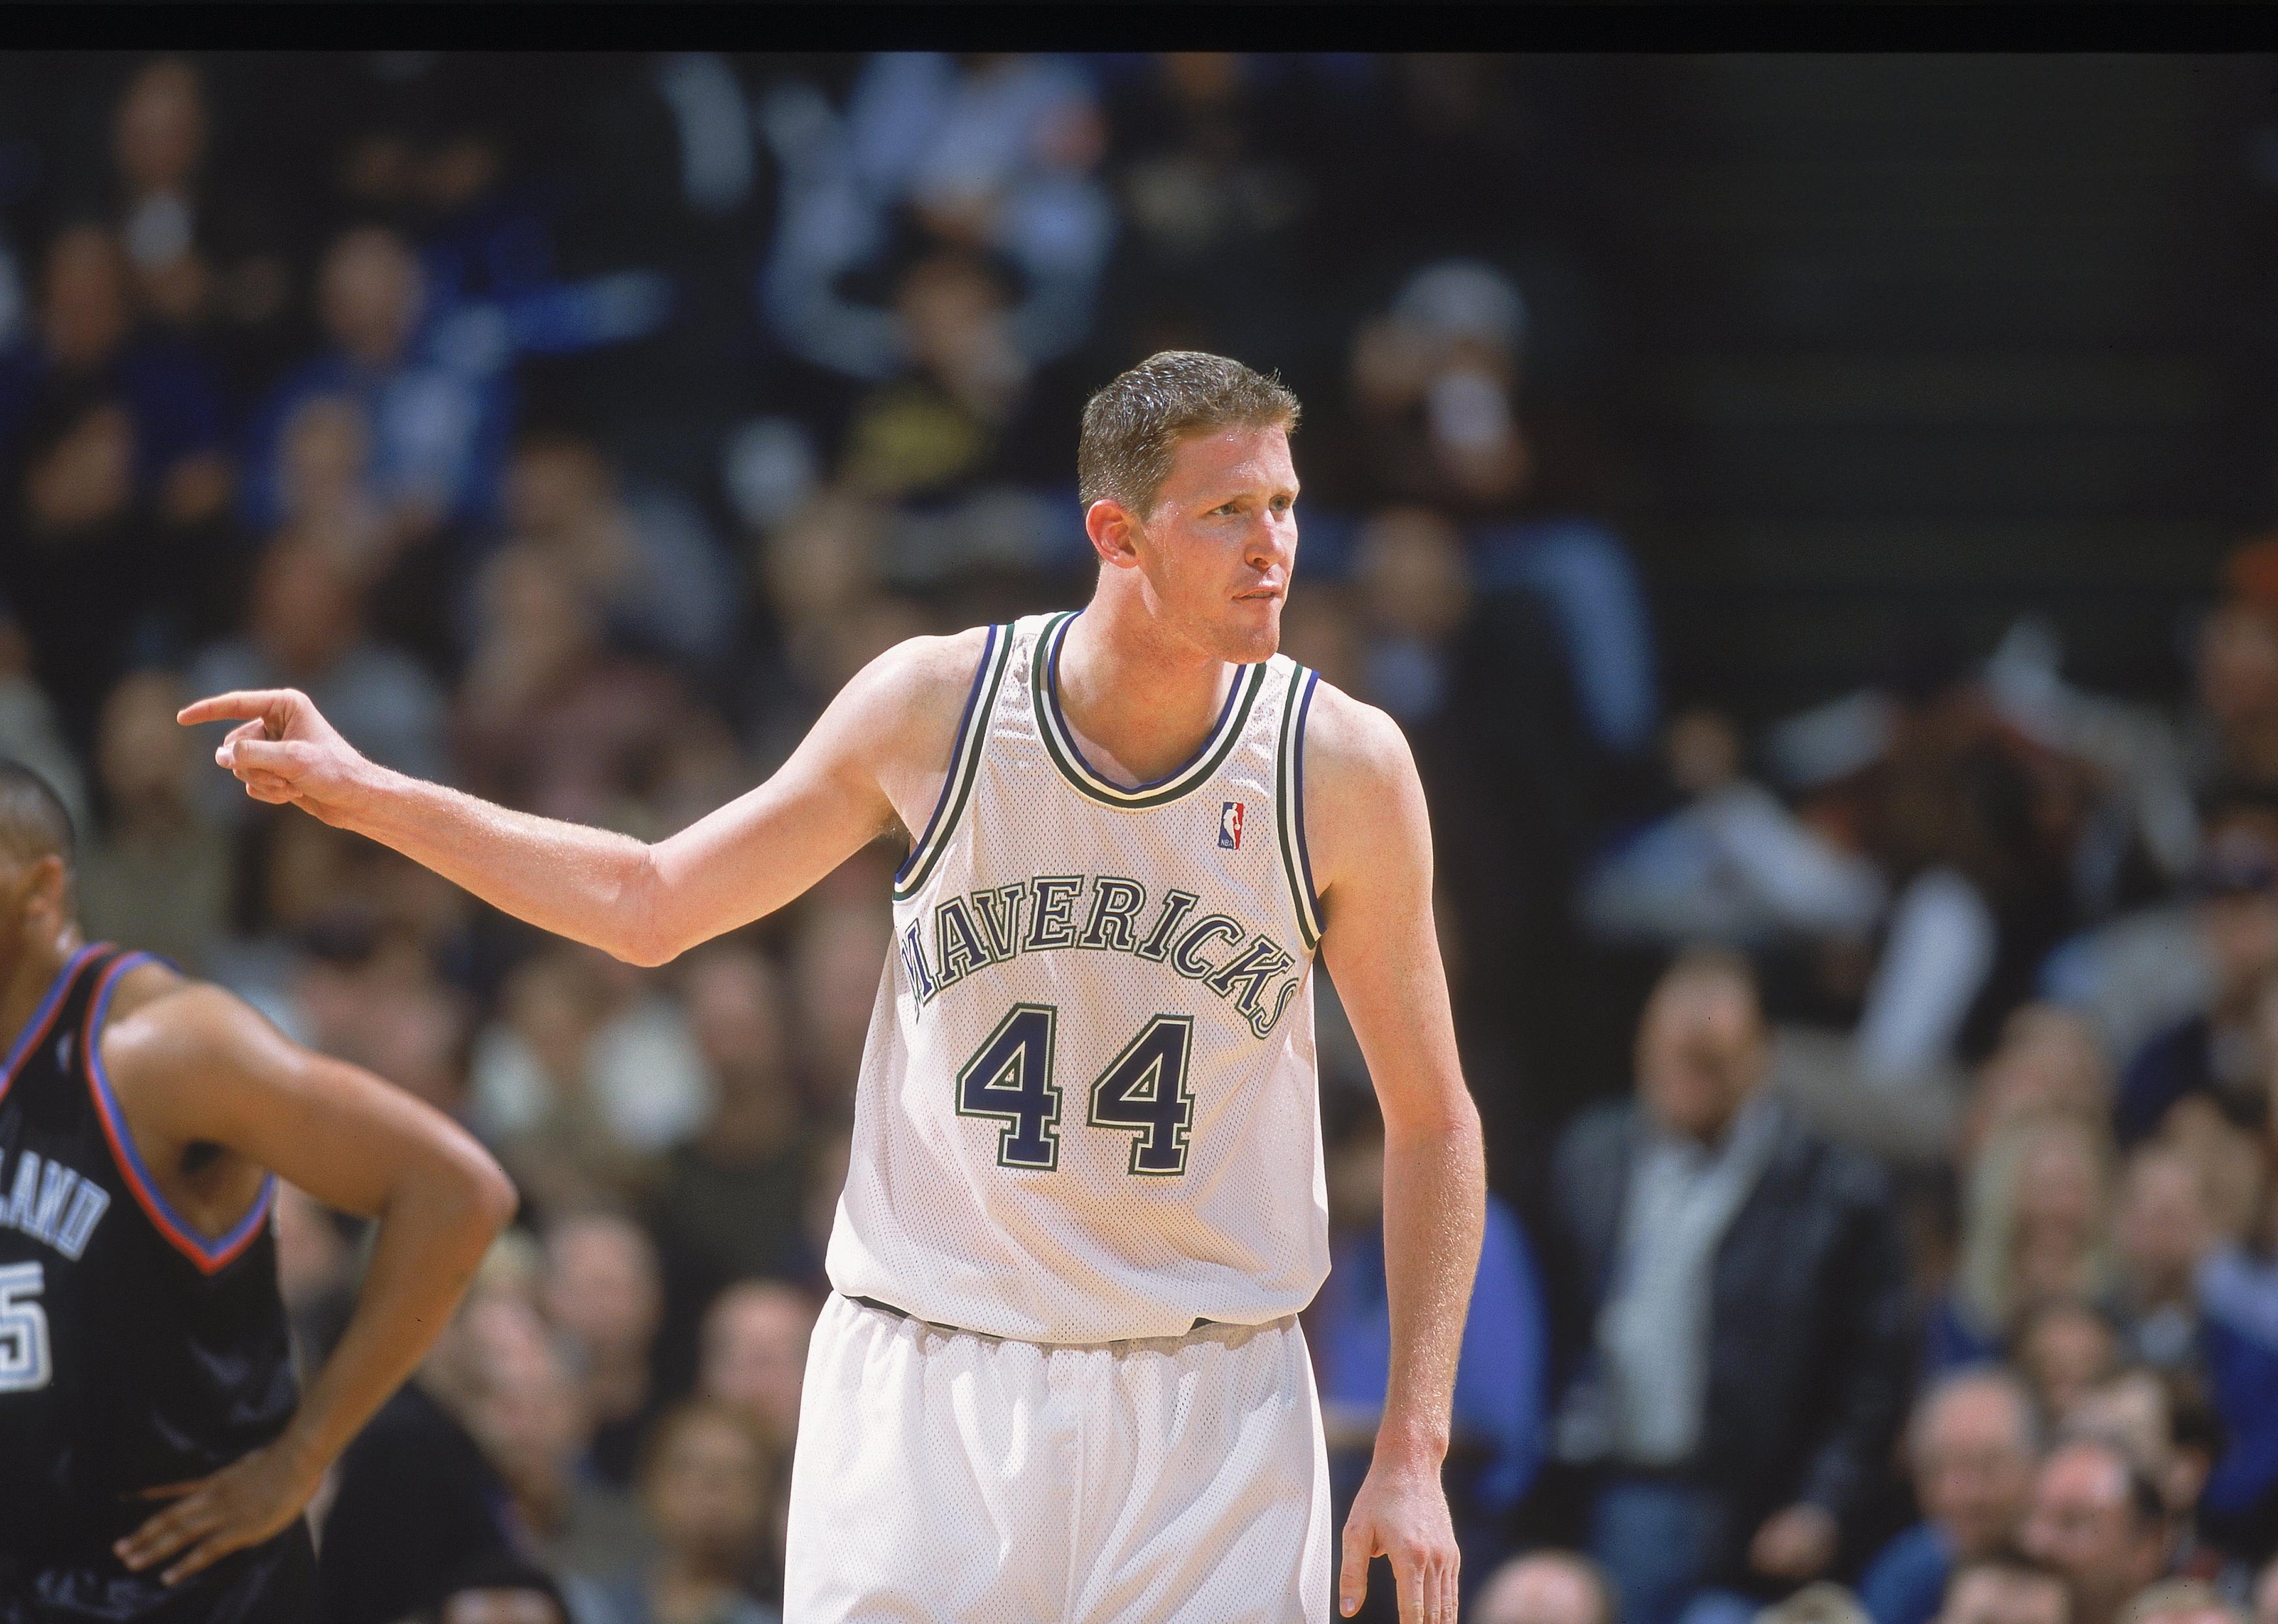 Shawn Bradley points on the court during a game at the Reunion Arena.